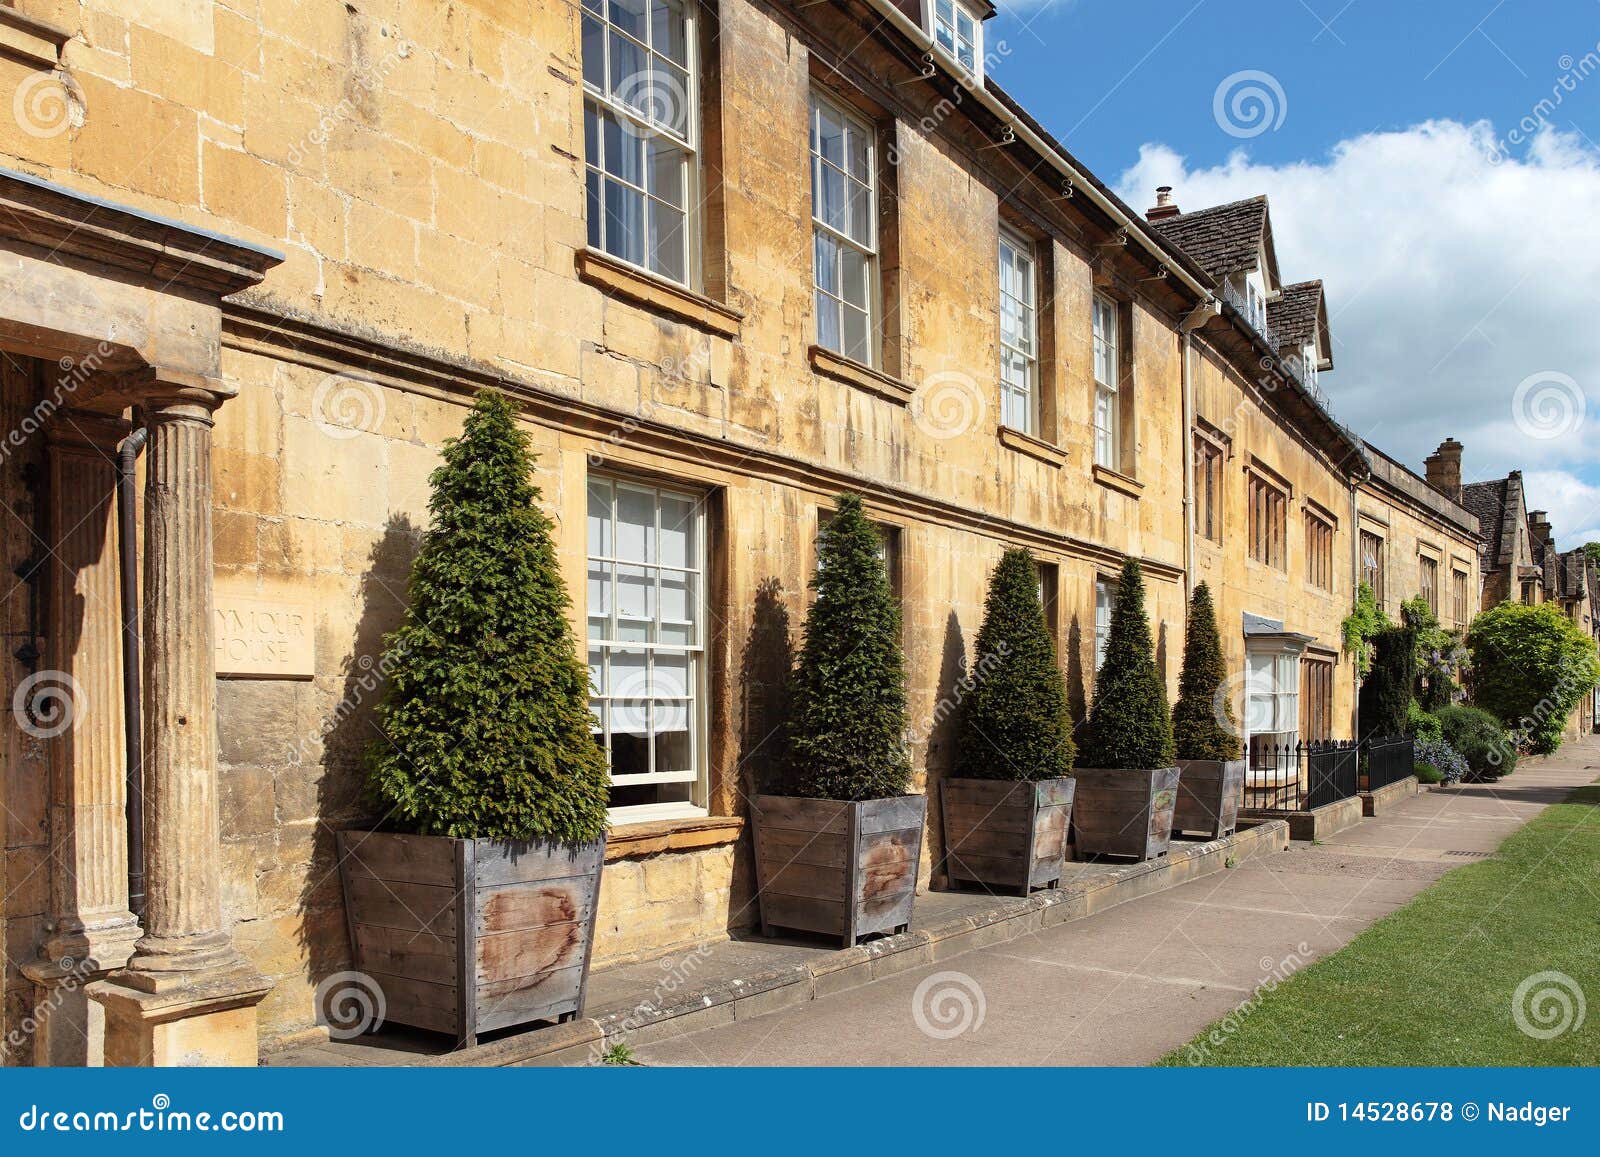 view of buildings in chipping campden, cotswolds